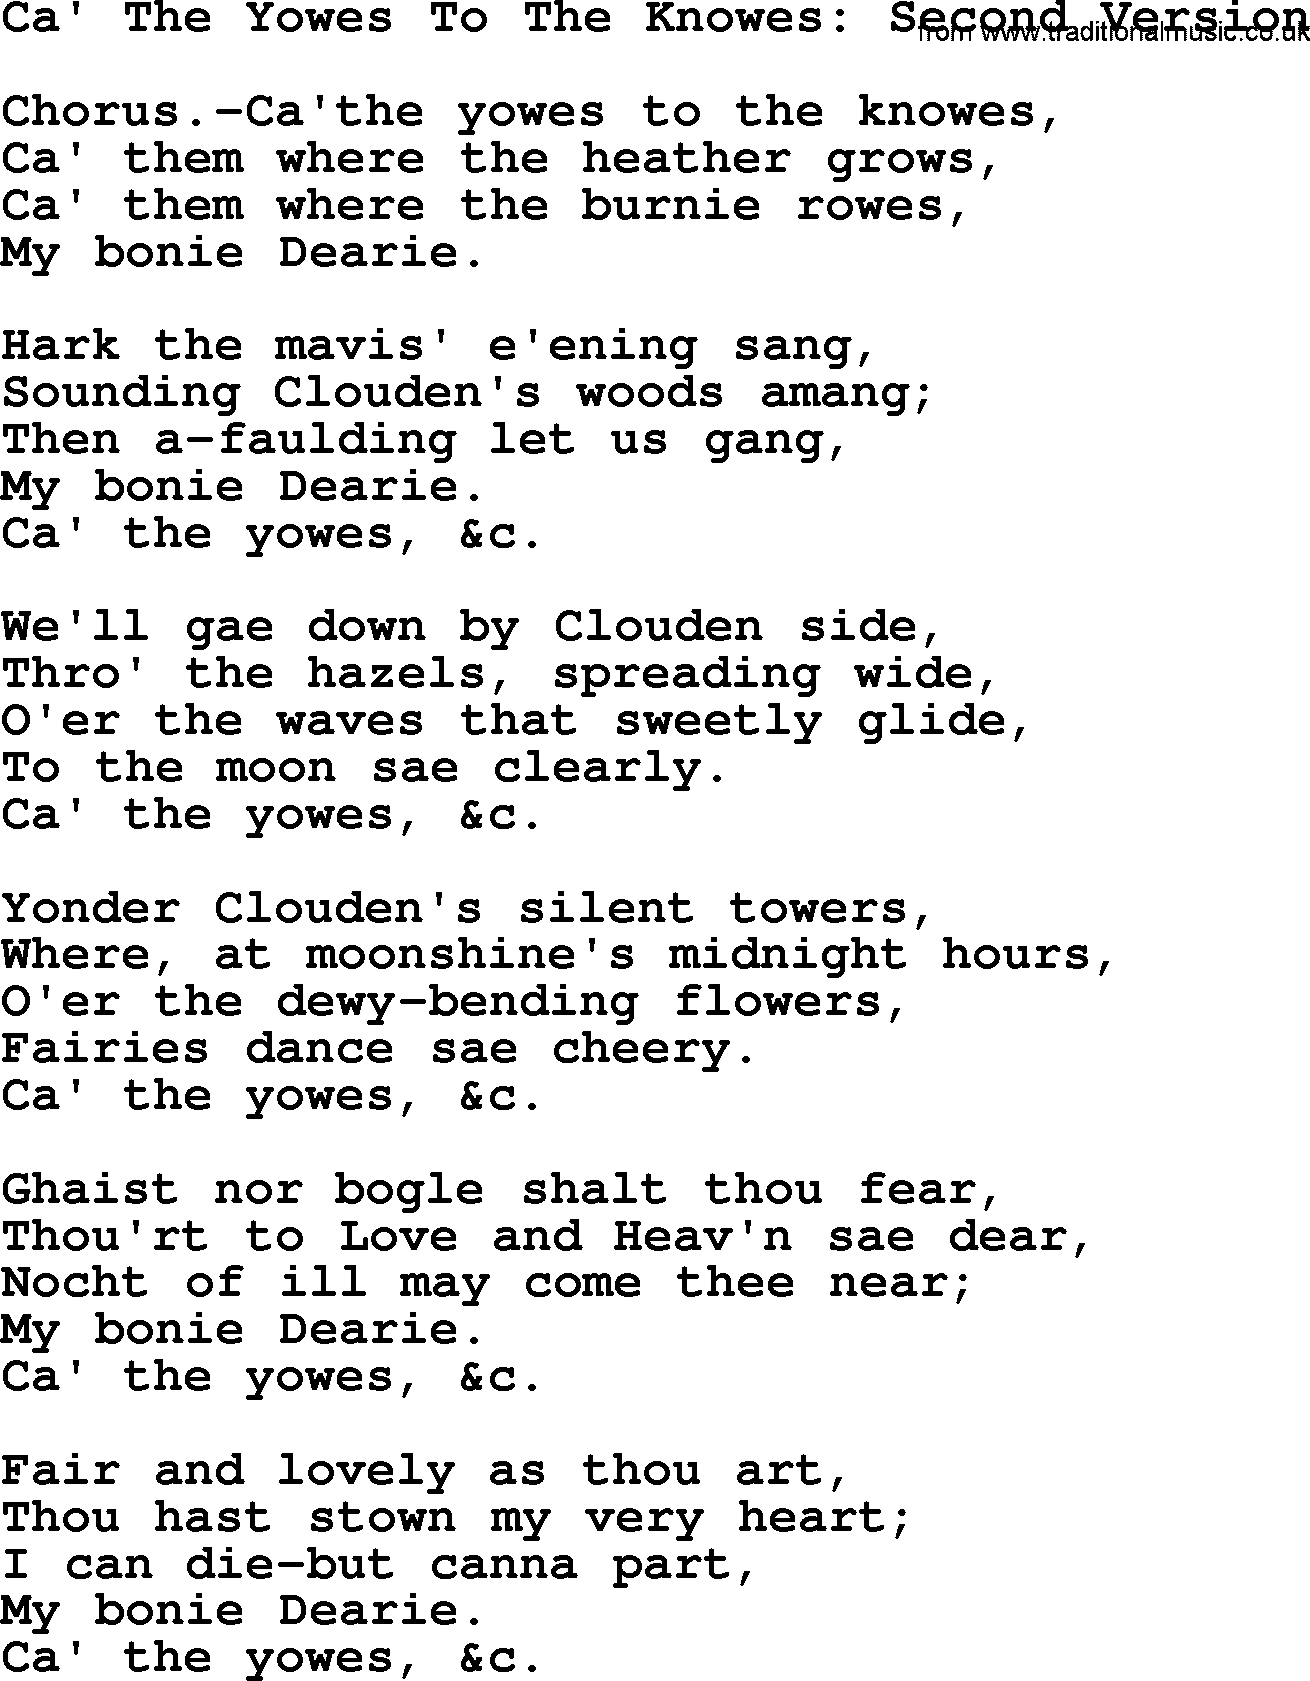 Robert Burns Songs & Lyrics: Ca' The Yowes To The Knowes Second Version